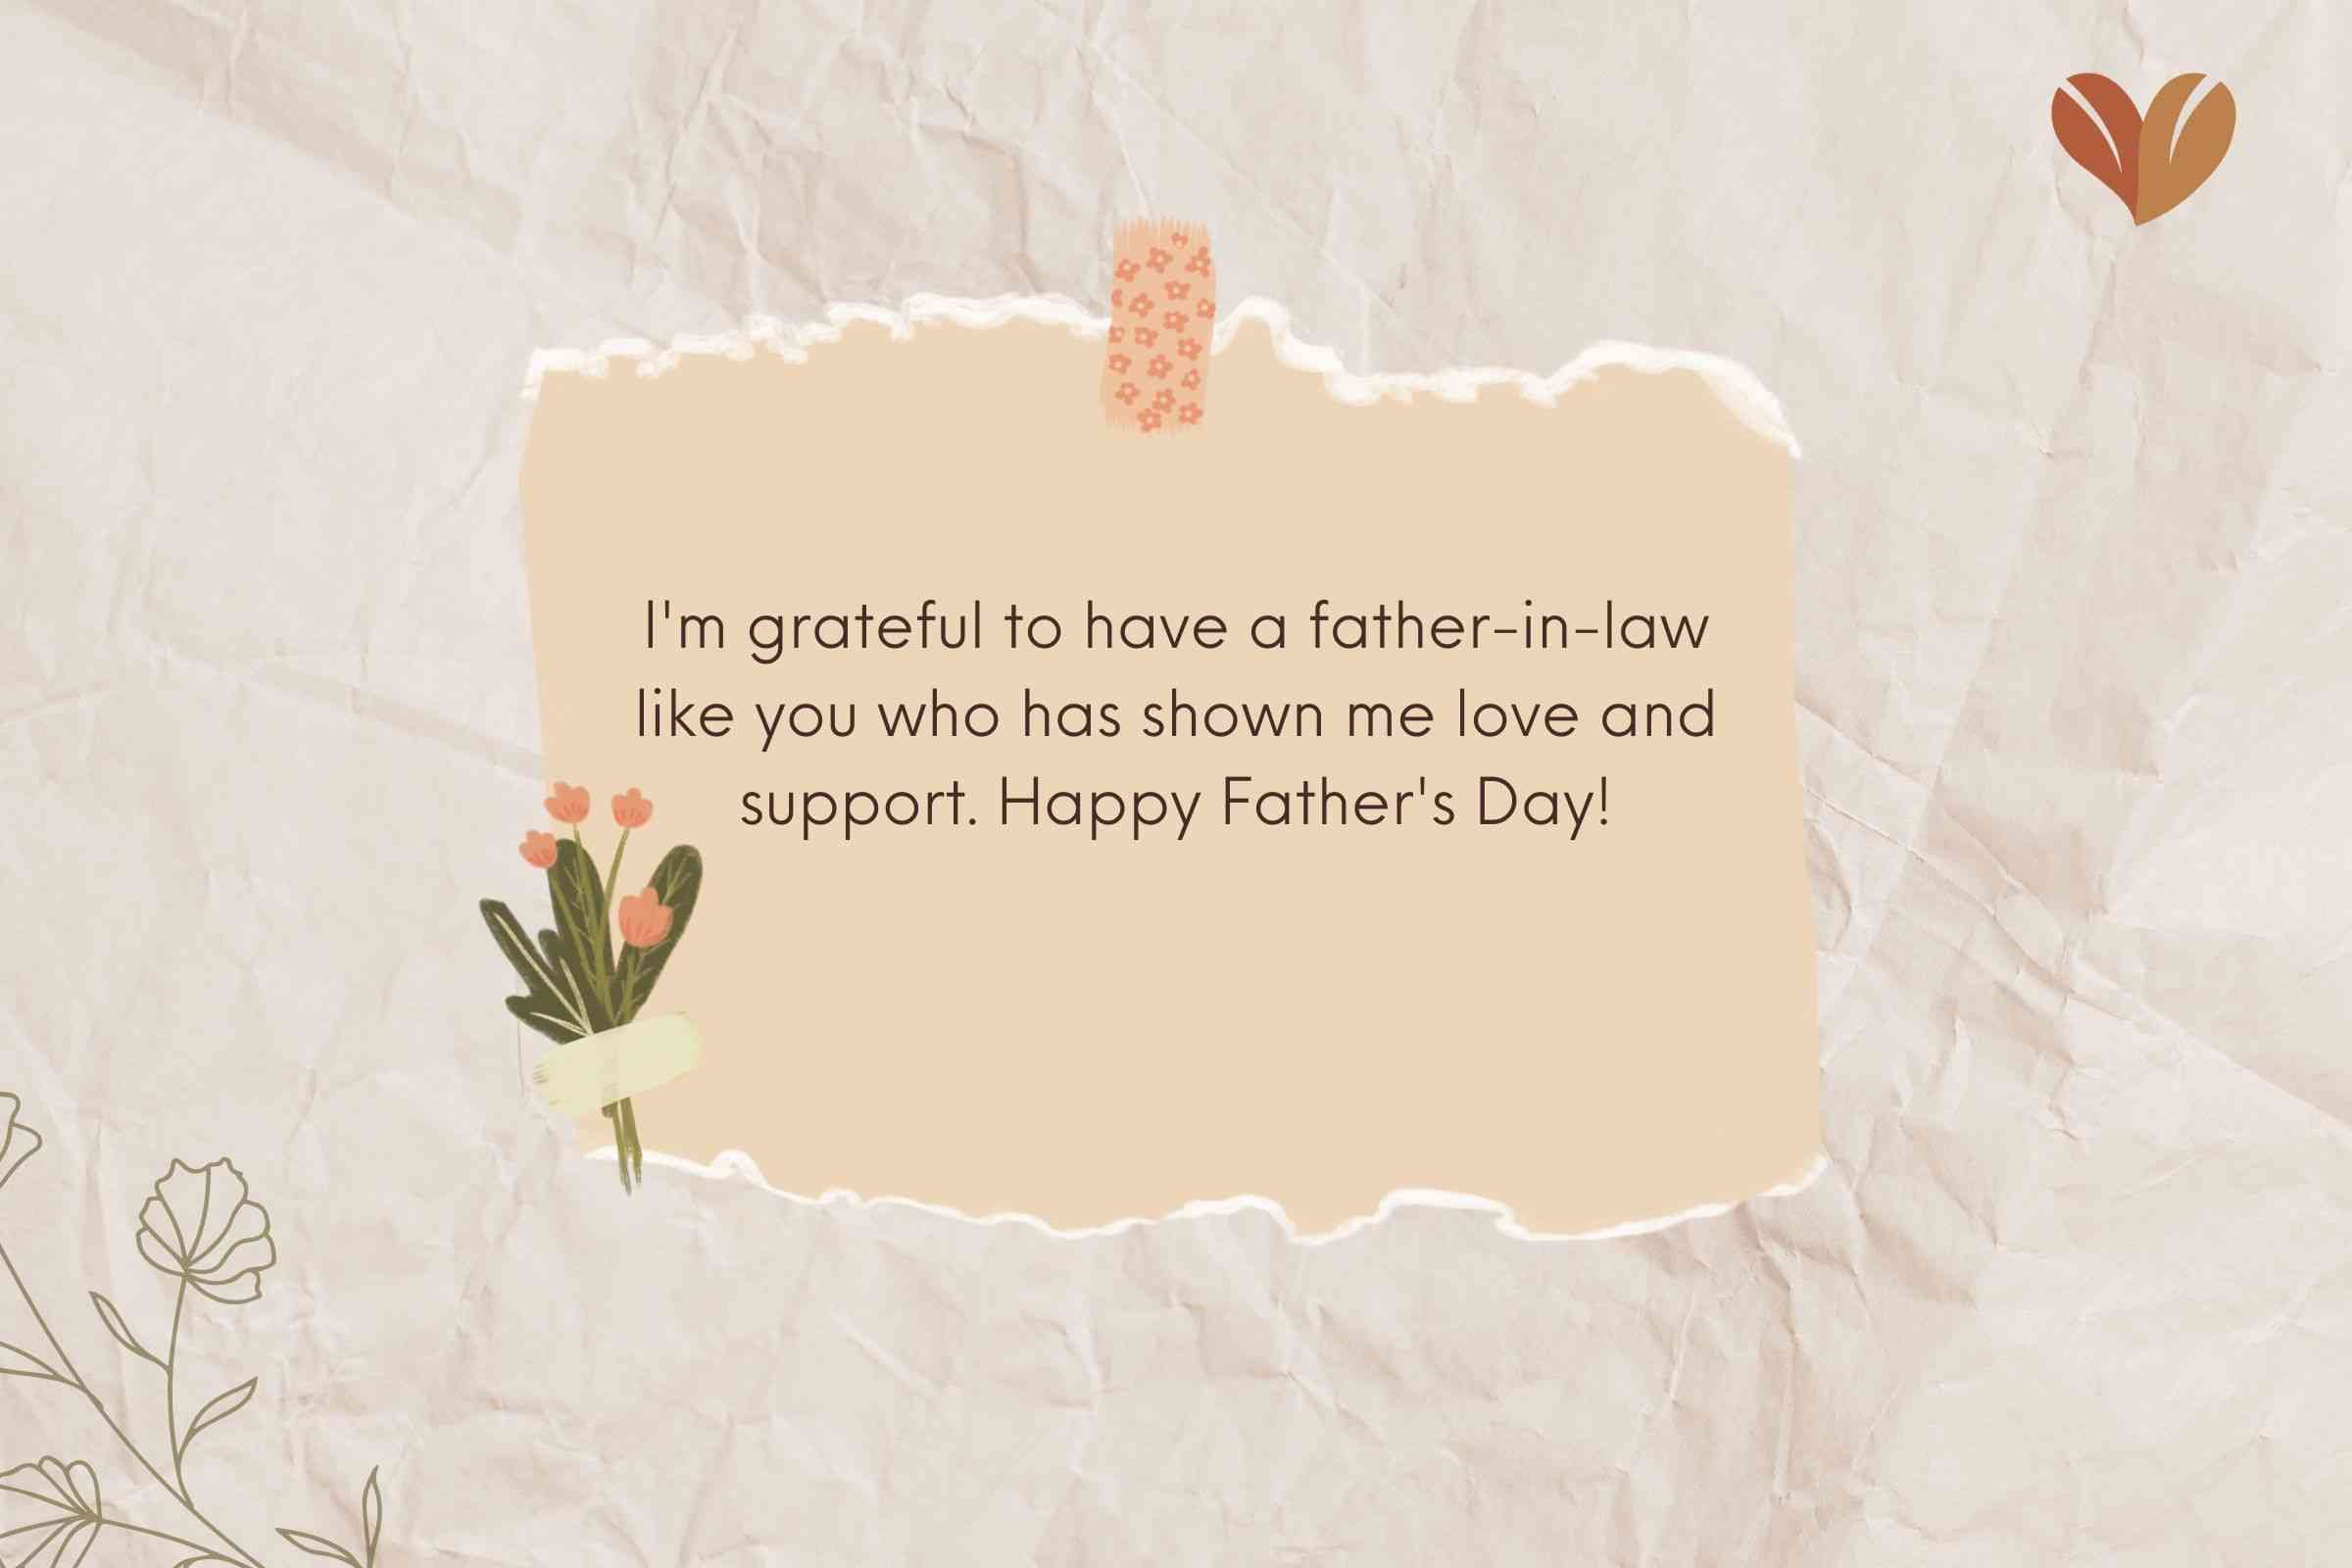 Grateful Gestures: Expressive Father's Day Quotes for Your Father-In-Law